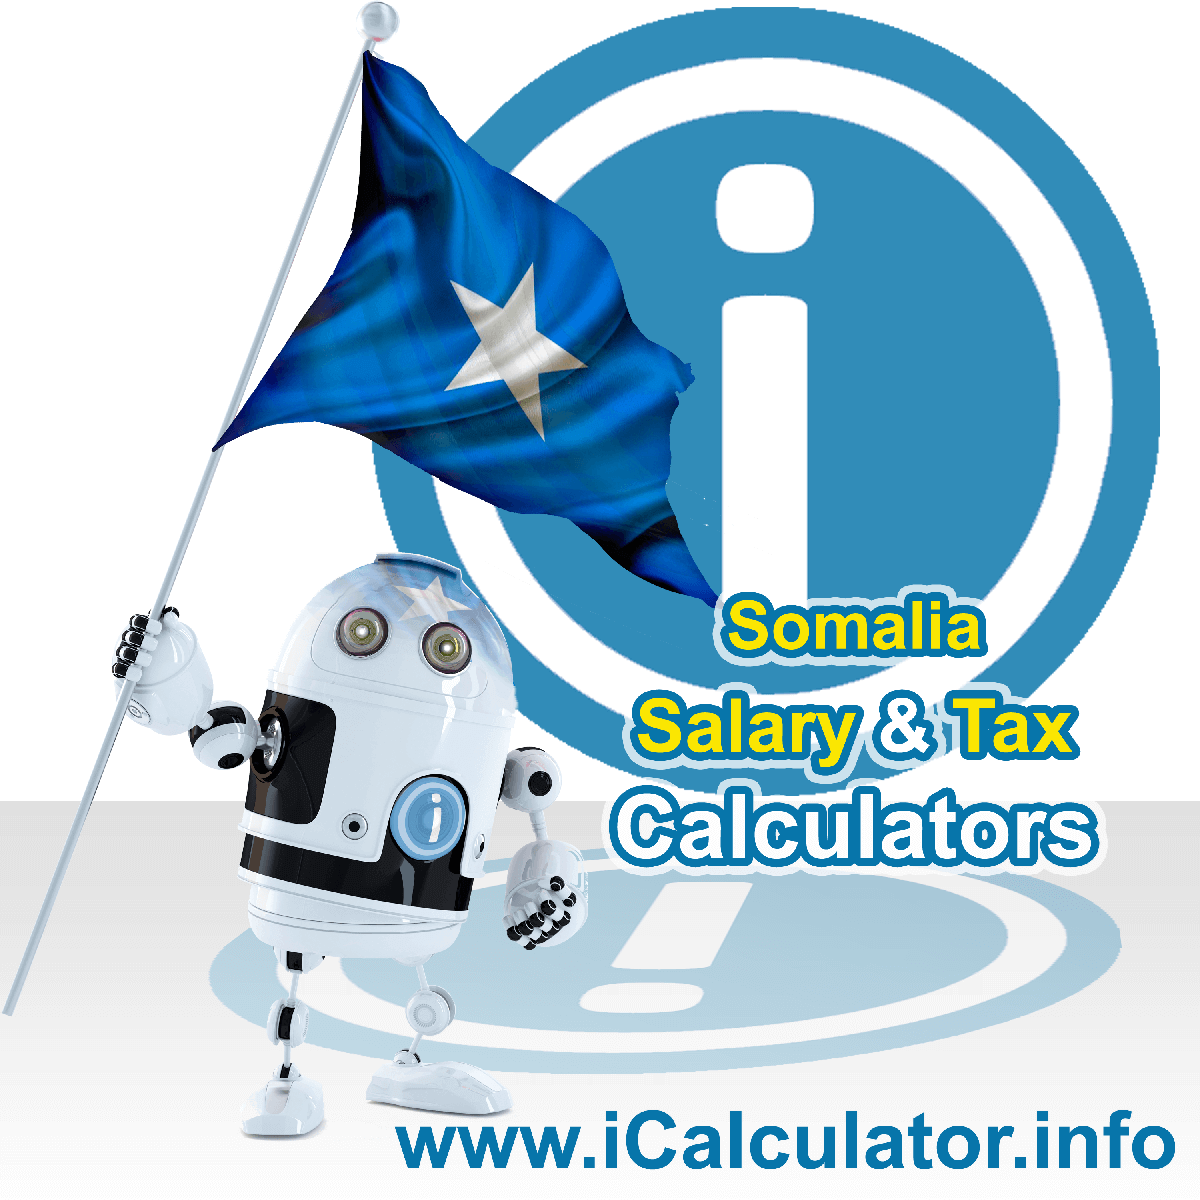 Somalia Salary Calculator. This image shows the Somaliaese flag and information relating to the tax formula for the Somalia Tax Calculator